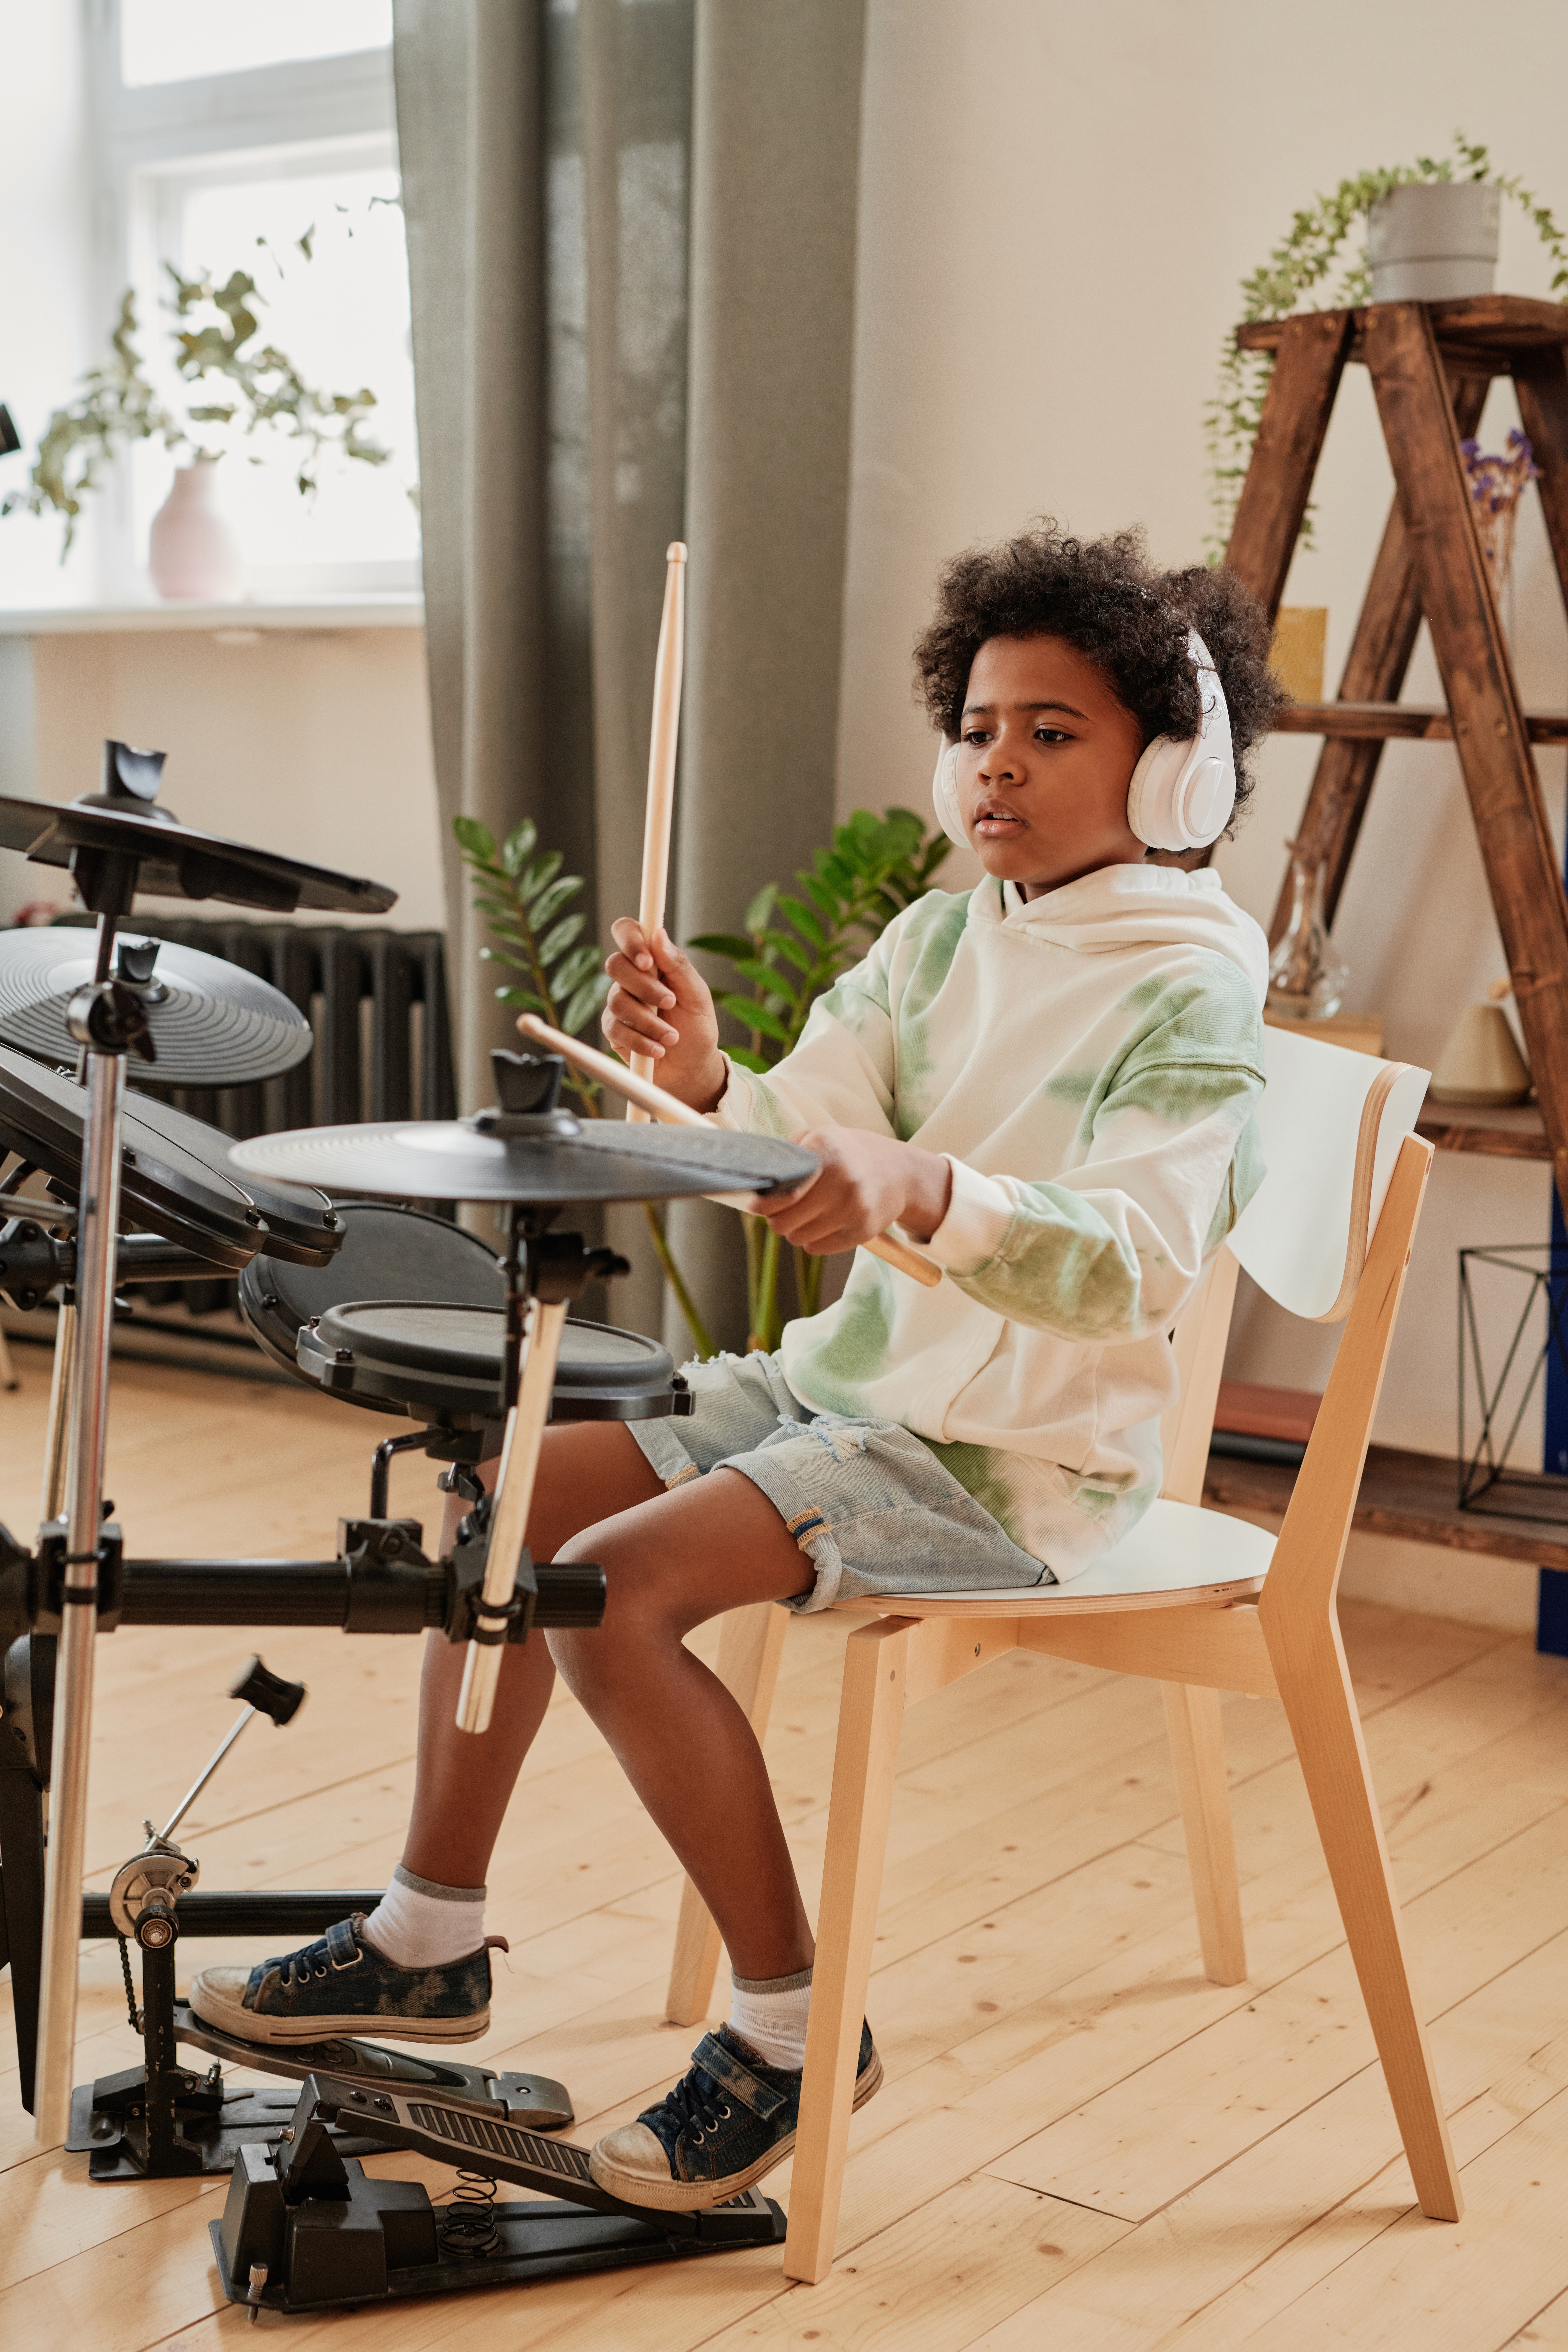 A young man taking a drum lesson on electric drums